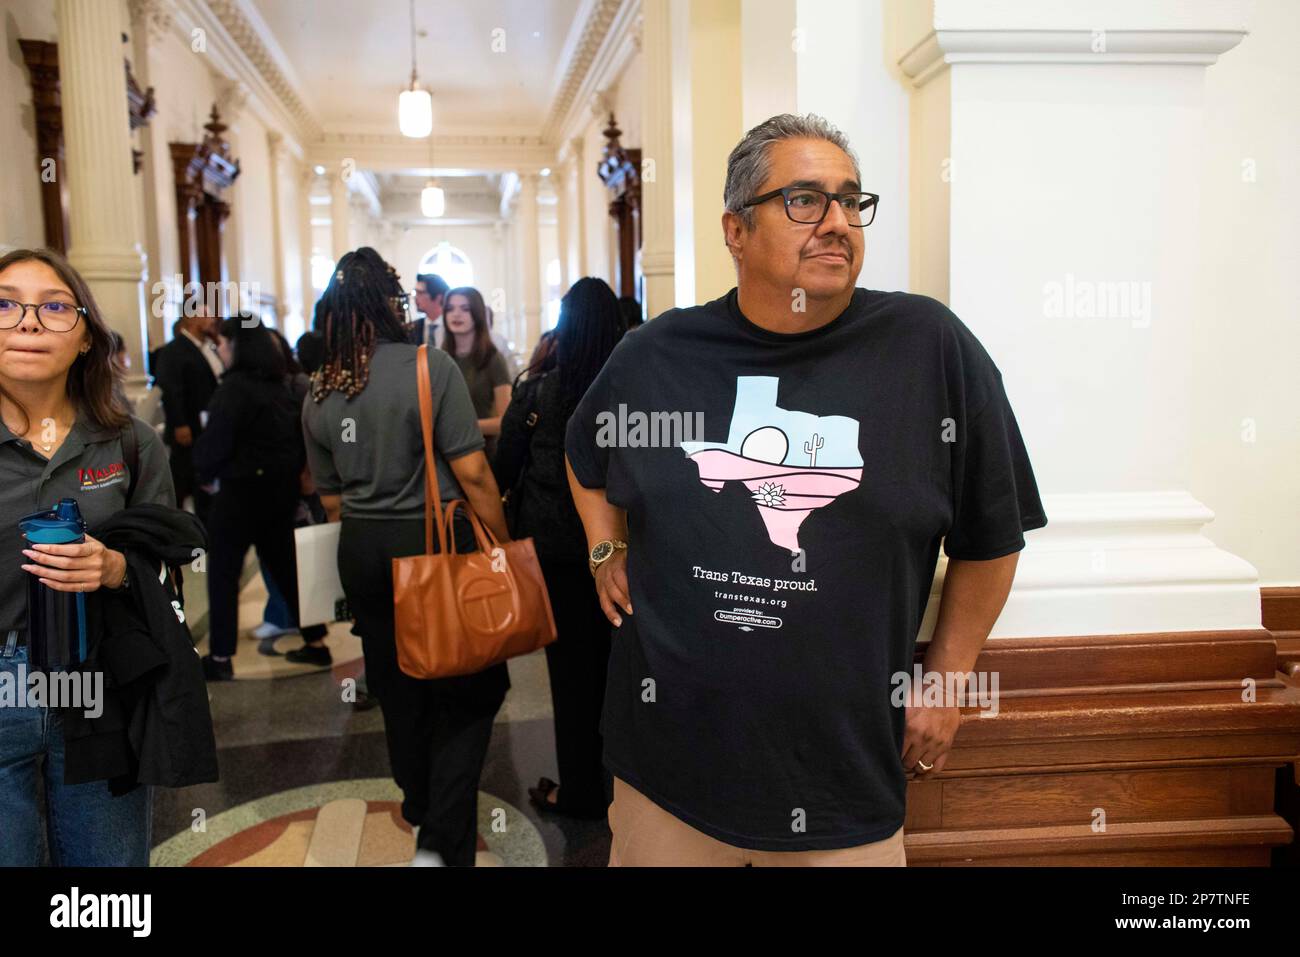 A man supporting transgender issues waits in the Capitol rotunda as his group gathers to lobby legislators. Credit: Bob Daemmrich/Alamy Live News Stock Photo